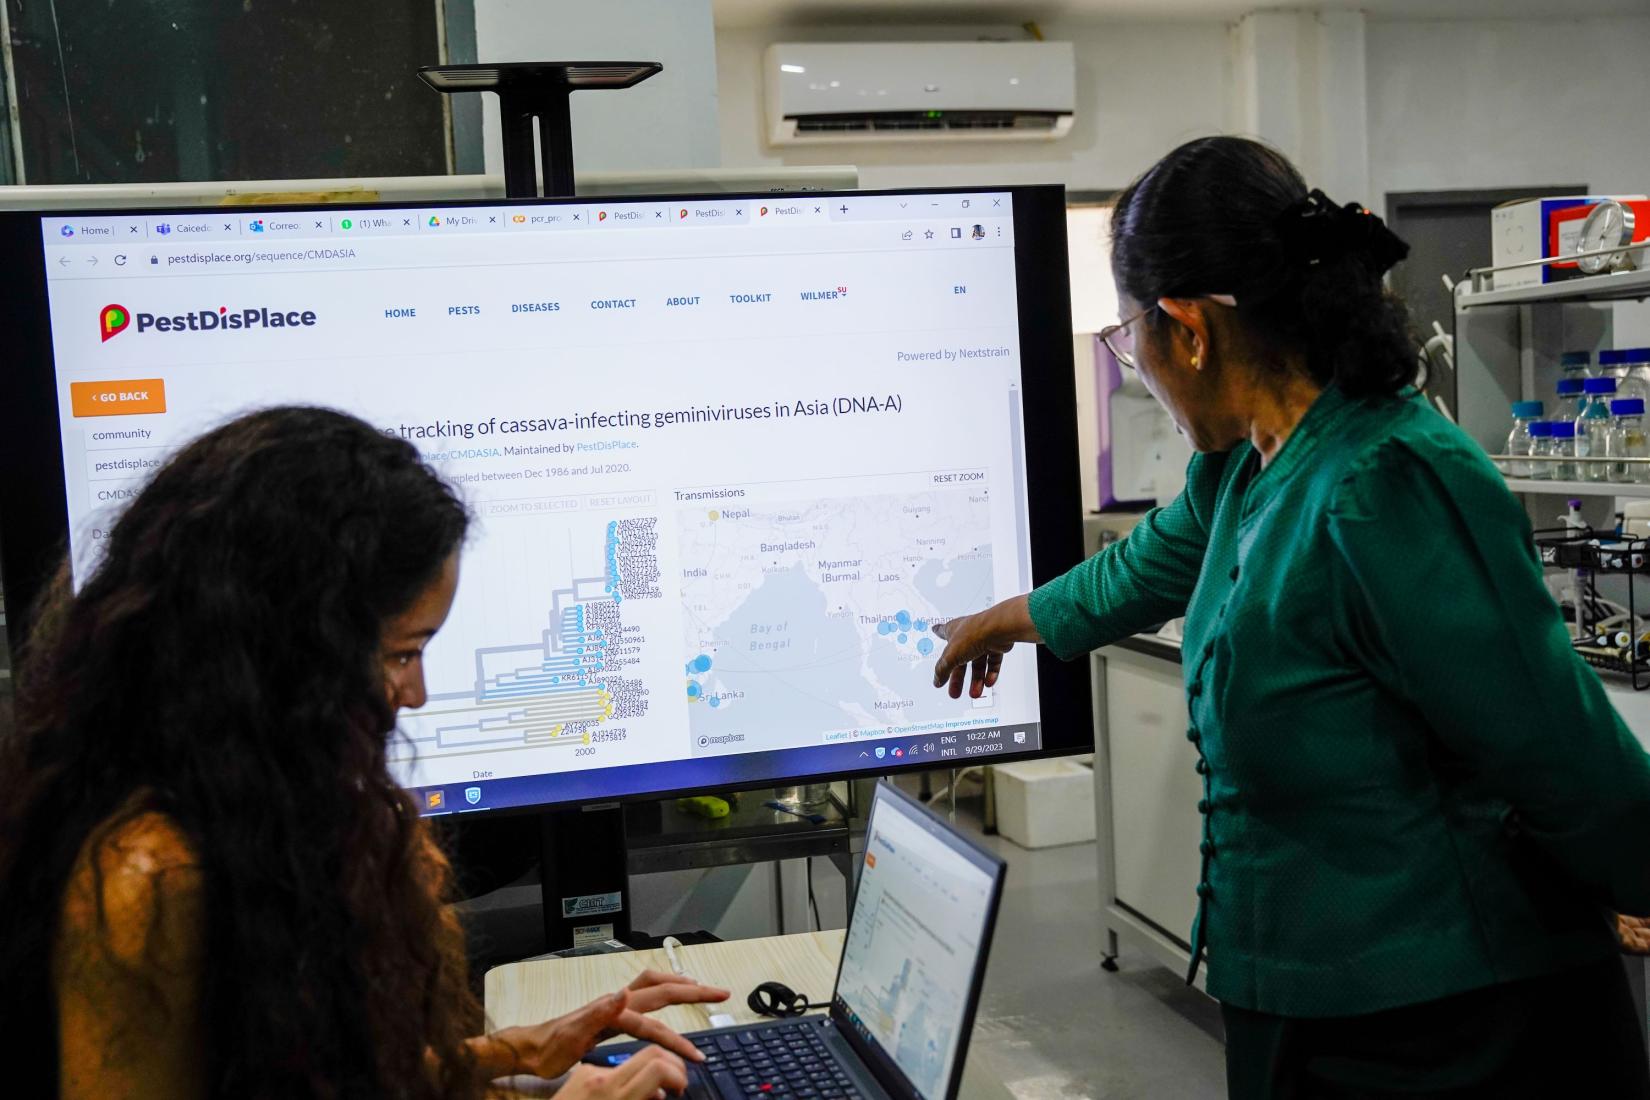 Women pointing at a large screen while another woman works on laptop in office